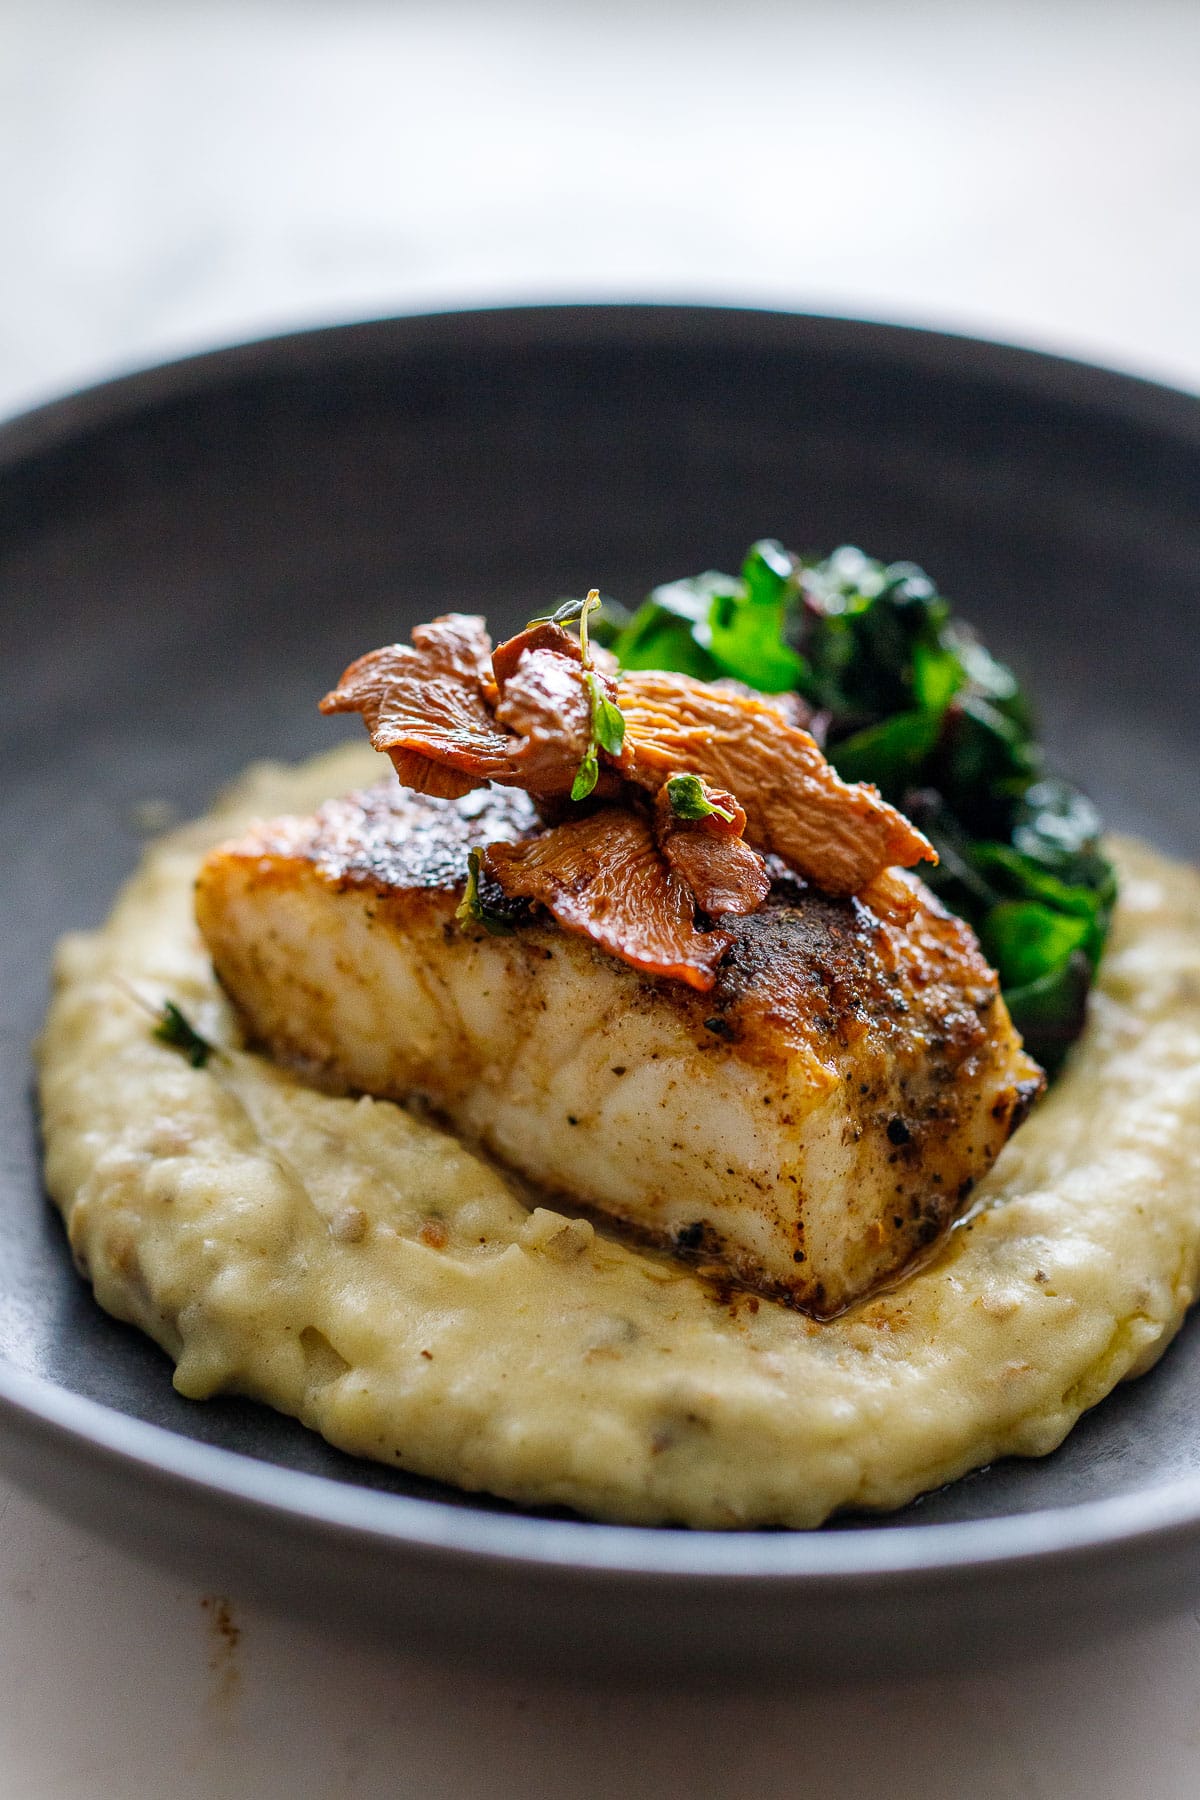 Mushroom dusted halibut topped with sauteed mushrooms over sunchoke puree with simple sauteed greens in a bowl. 